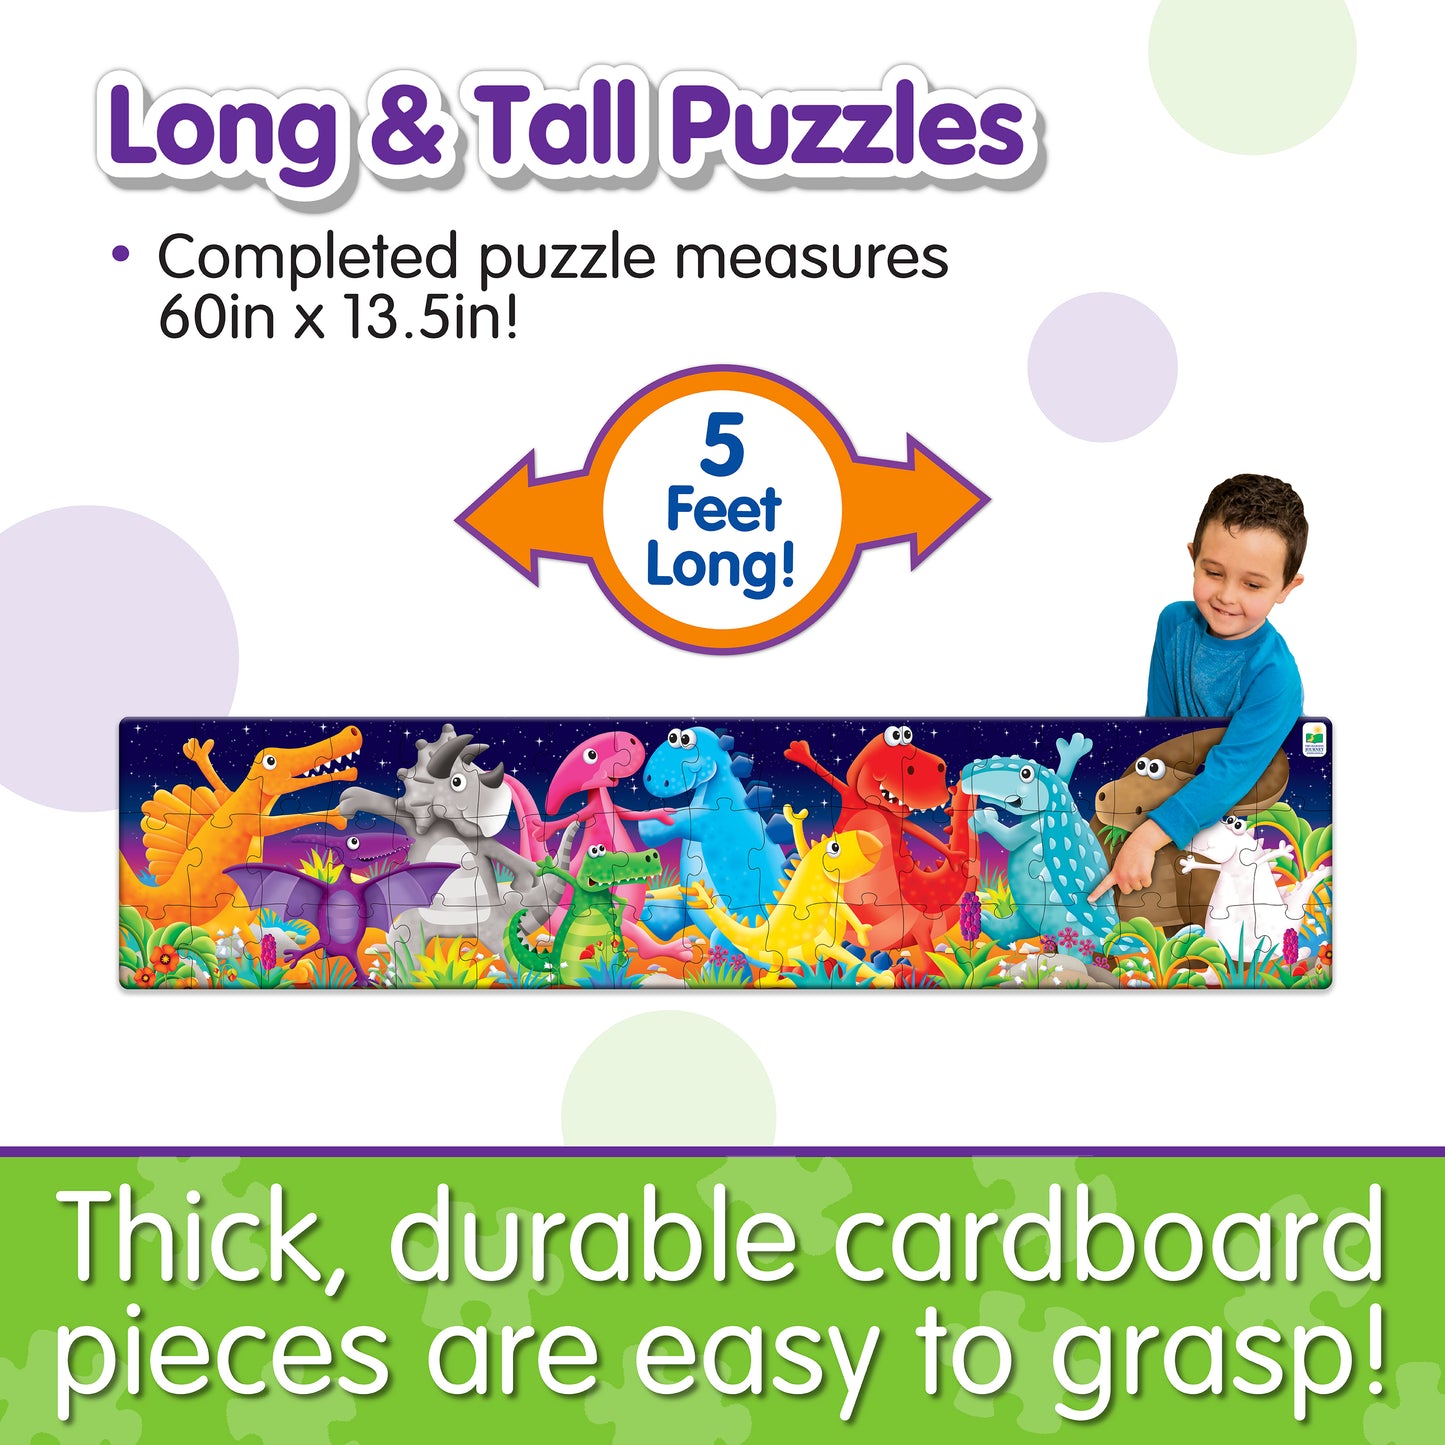 Infographic about Long and Tall Color Dancing Dinos Puzzle's features that says, "Thick, durable cardboard pieces are easy to grasp!"